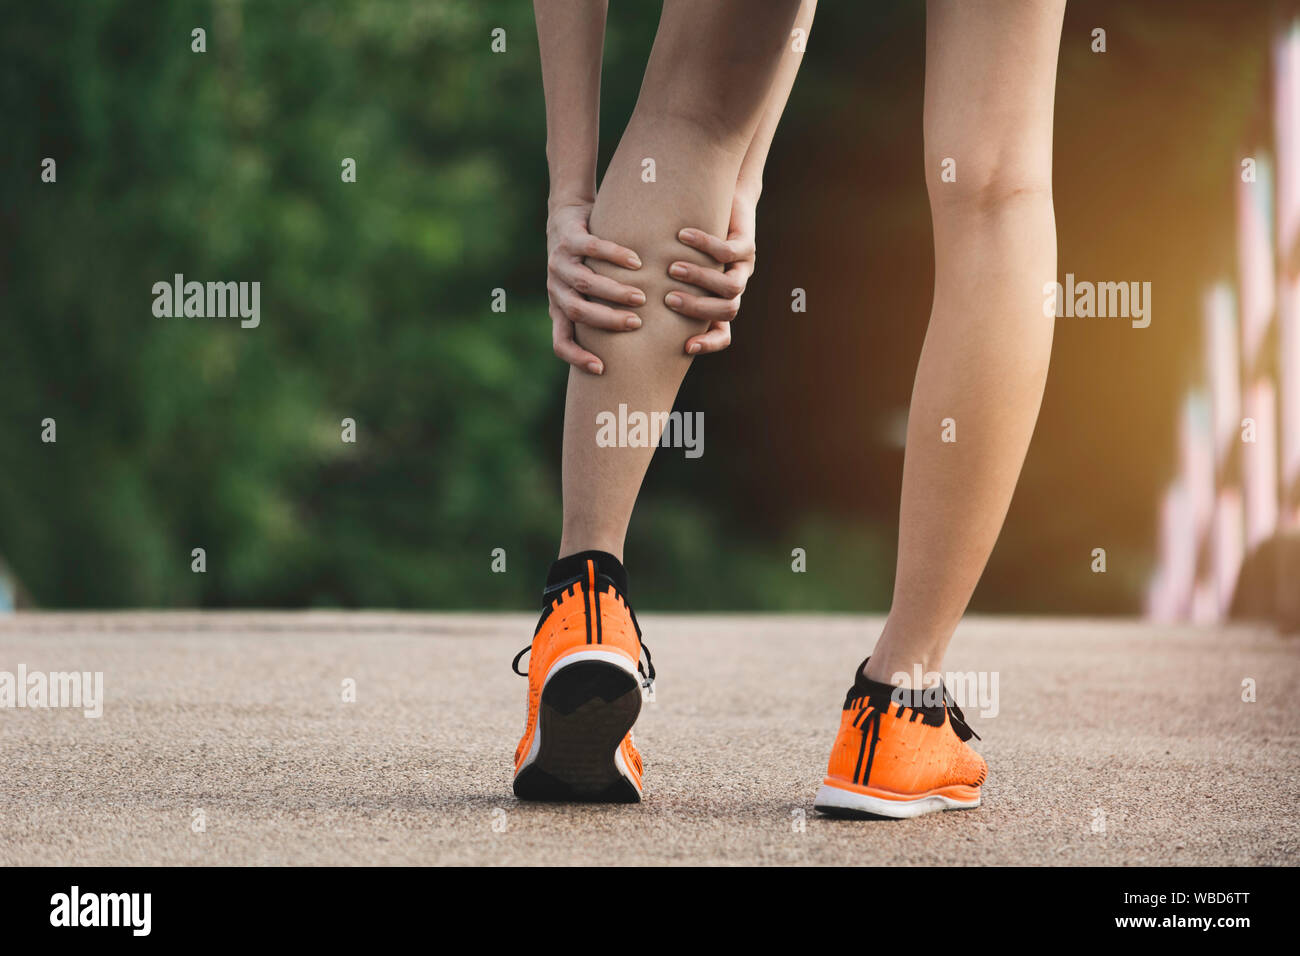 The female clings to a bad leg. The pain in her leg. Health and painful concept. Stock Photo